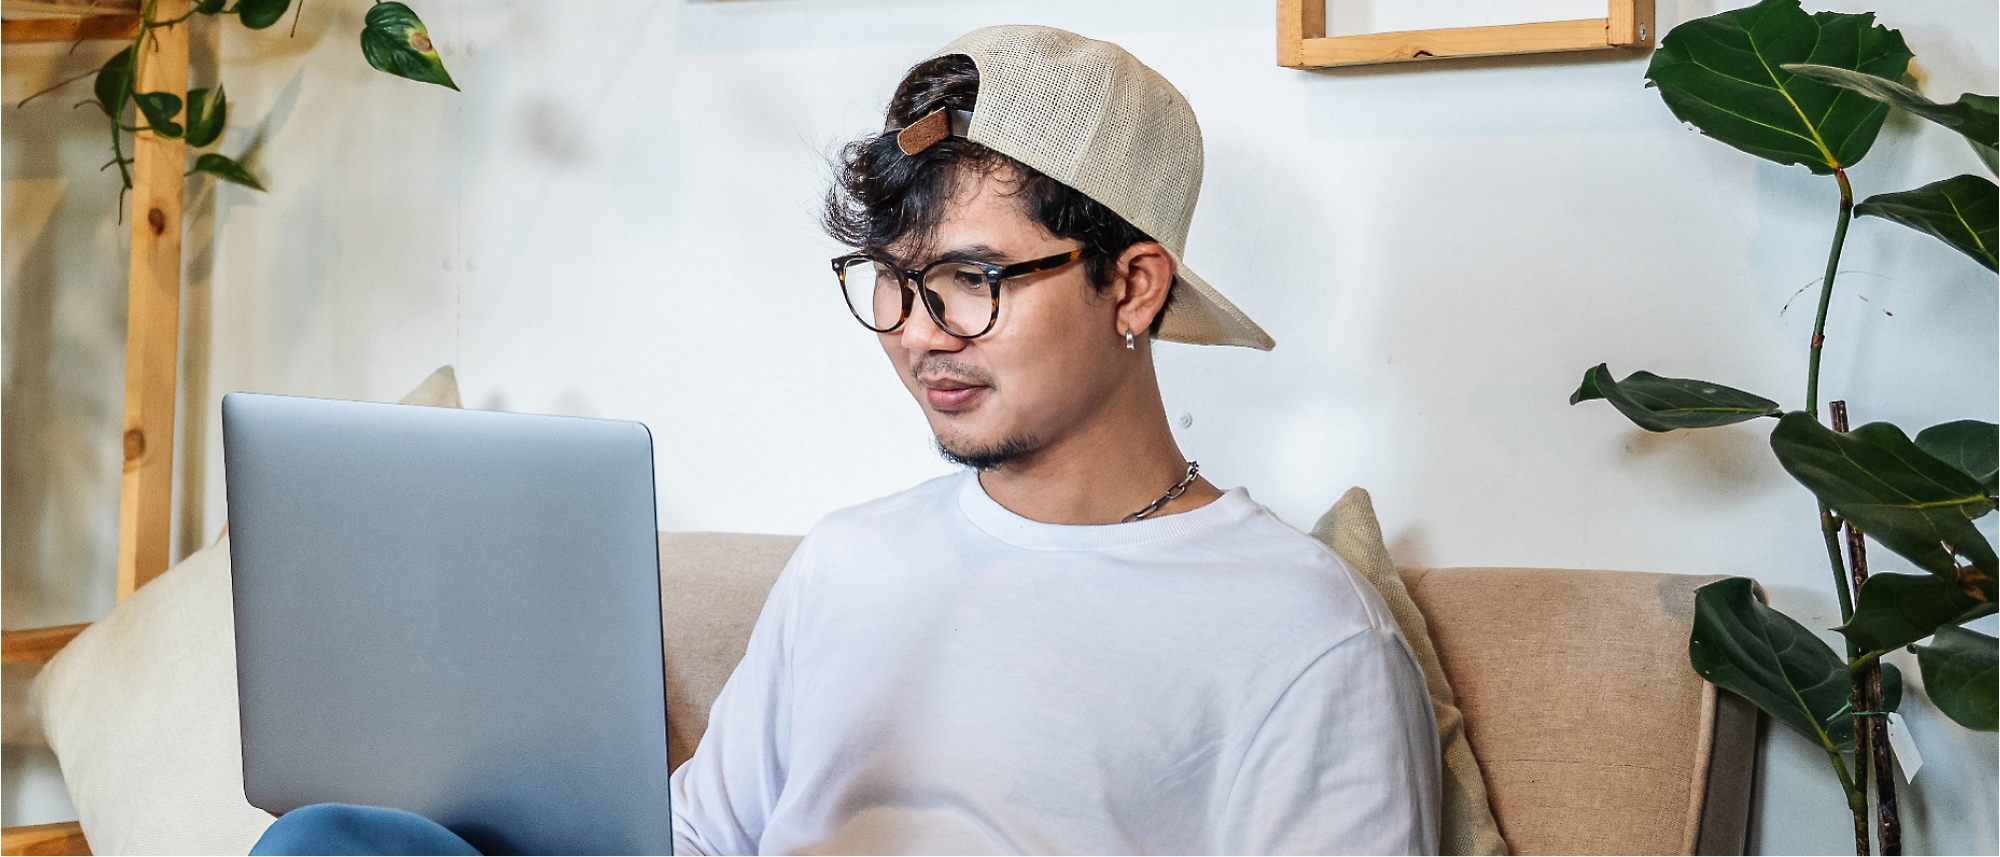 A person wearing glasses and a backward cap is sitting on a couch, using a laptop